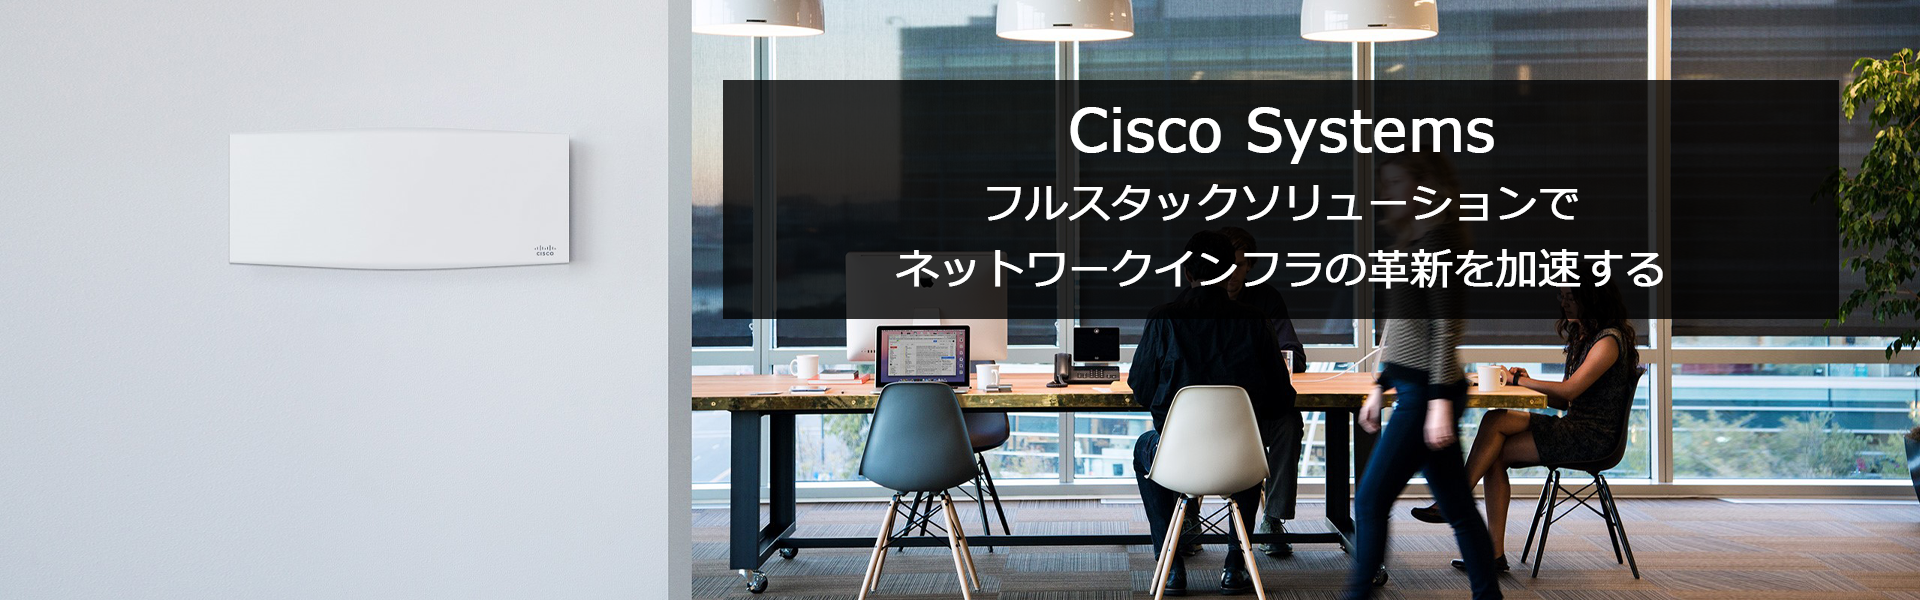 Cisco_topbanner.png